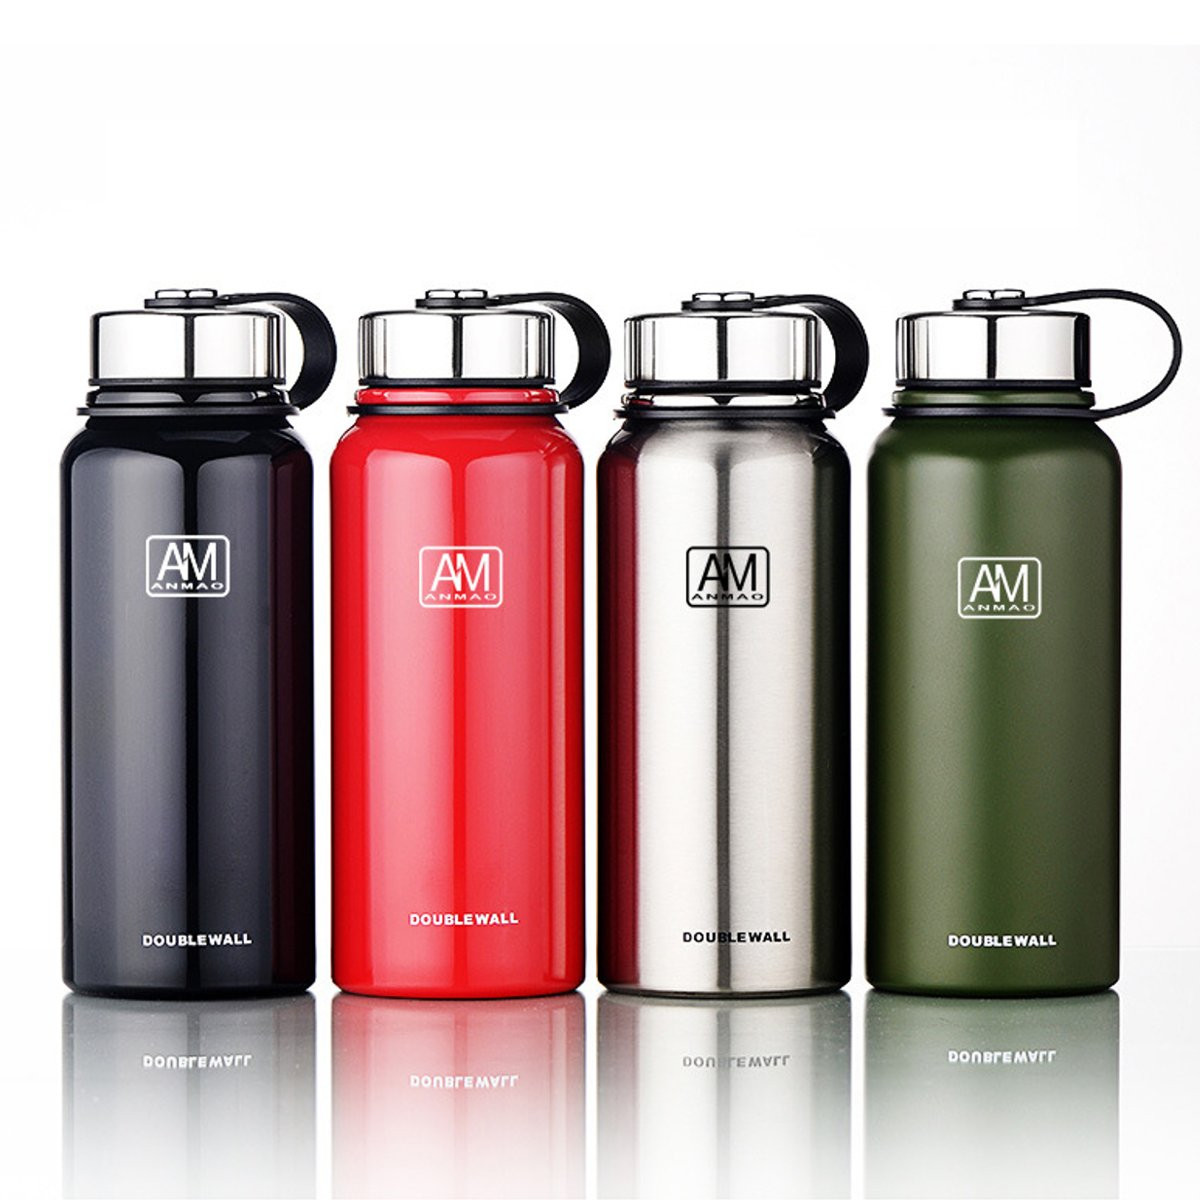 

IPRee® 1100ml Outdoor Portable Vacuum Insulated Water Bottle Double Walled Stainless Steel Drinking Cup Sports Travel